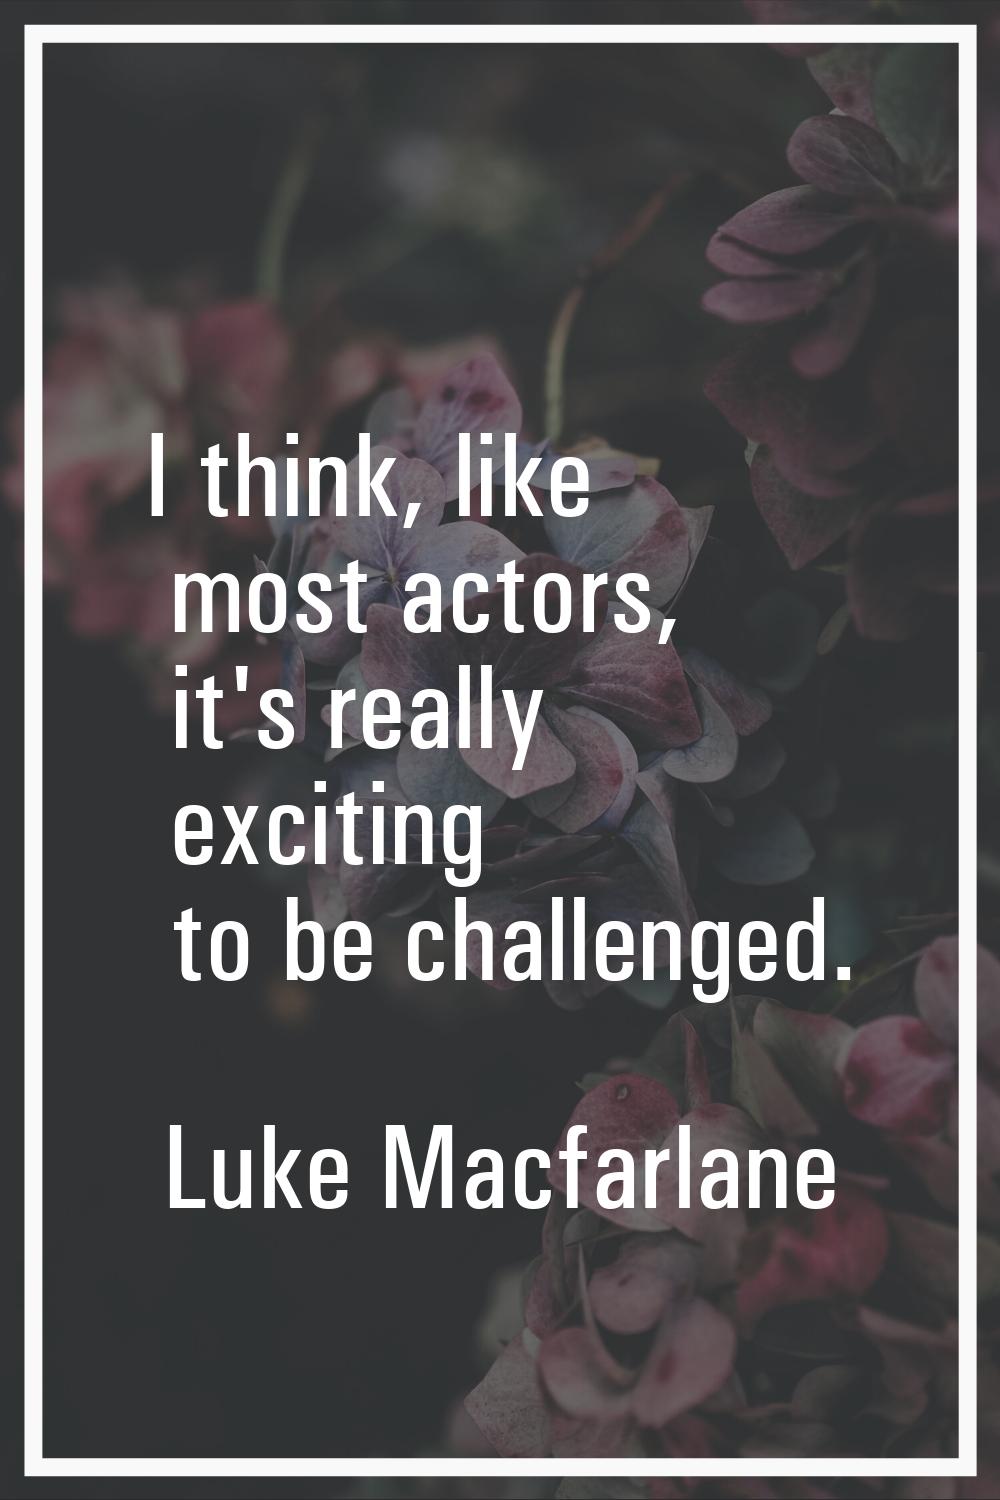 I think, like most actors, it's really exciting to be challenged.